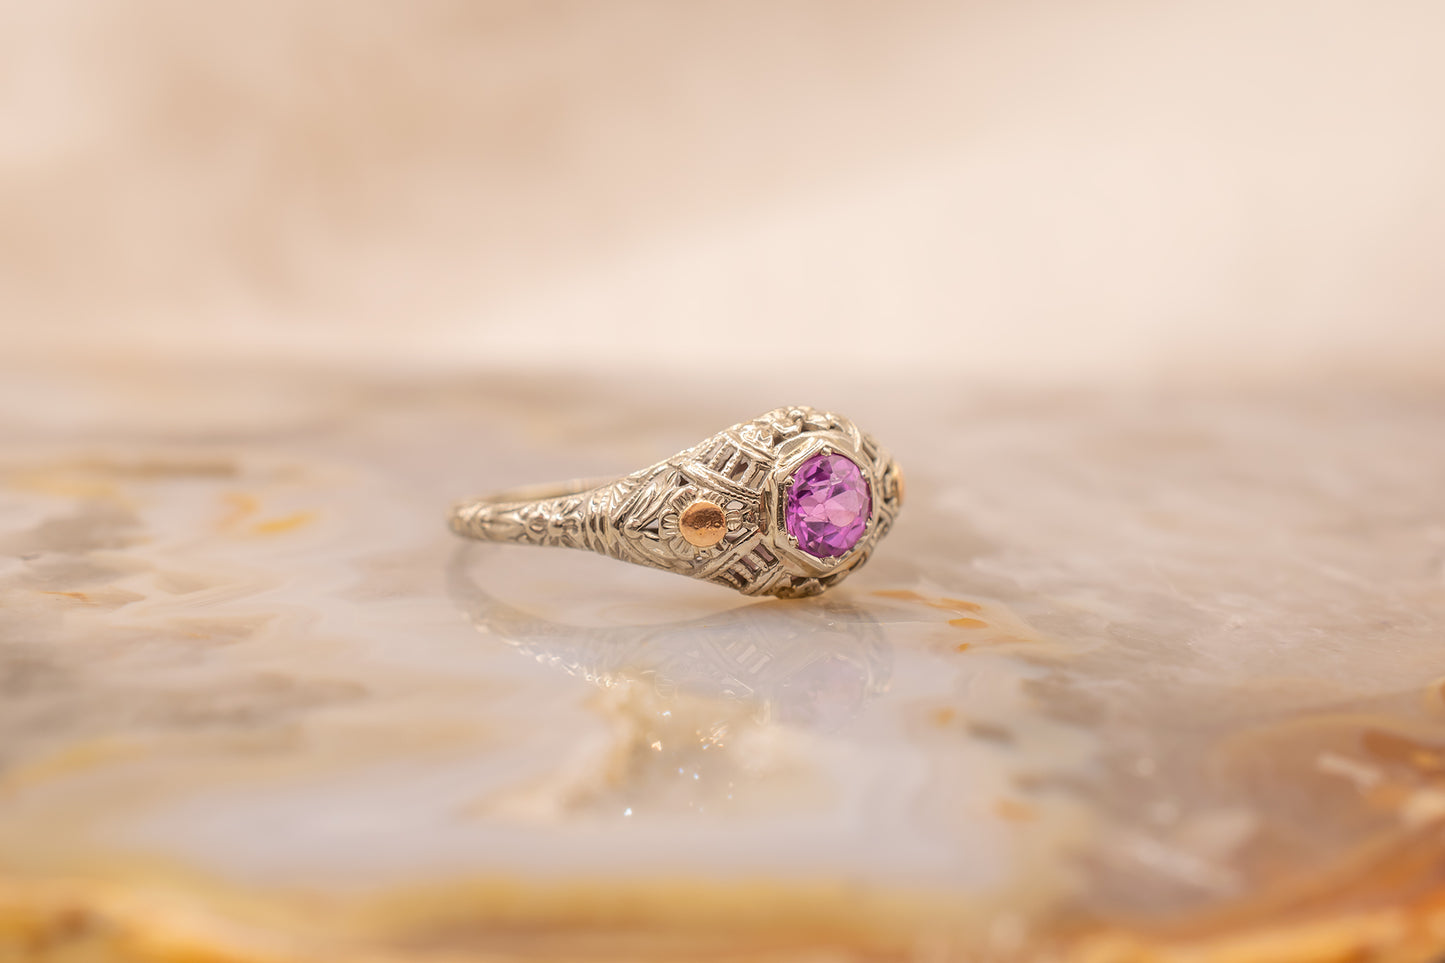 Vintage Circa 1930s Art Deco 18K White Gold 0.39 ct. Pink Sapphire Ring With Filigree and Floral Details Size 5